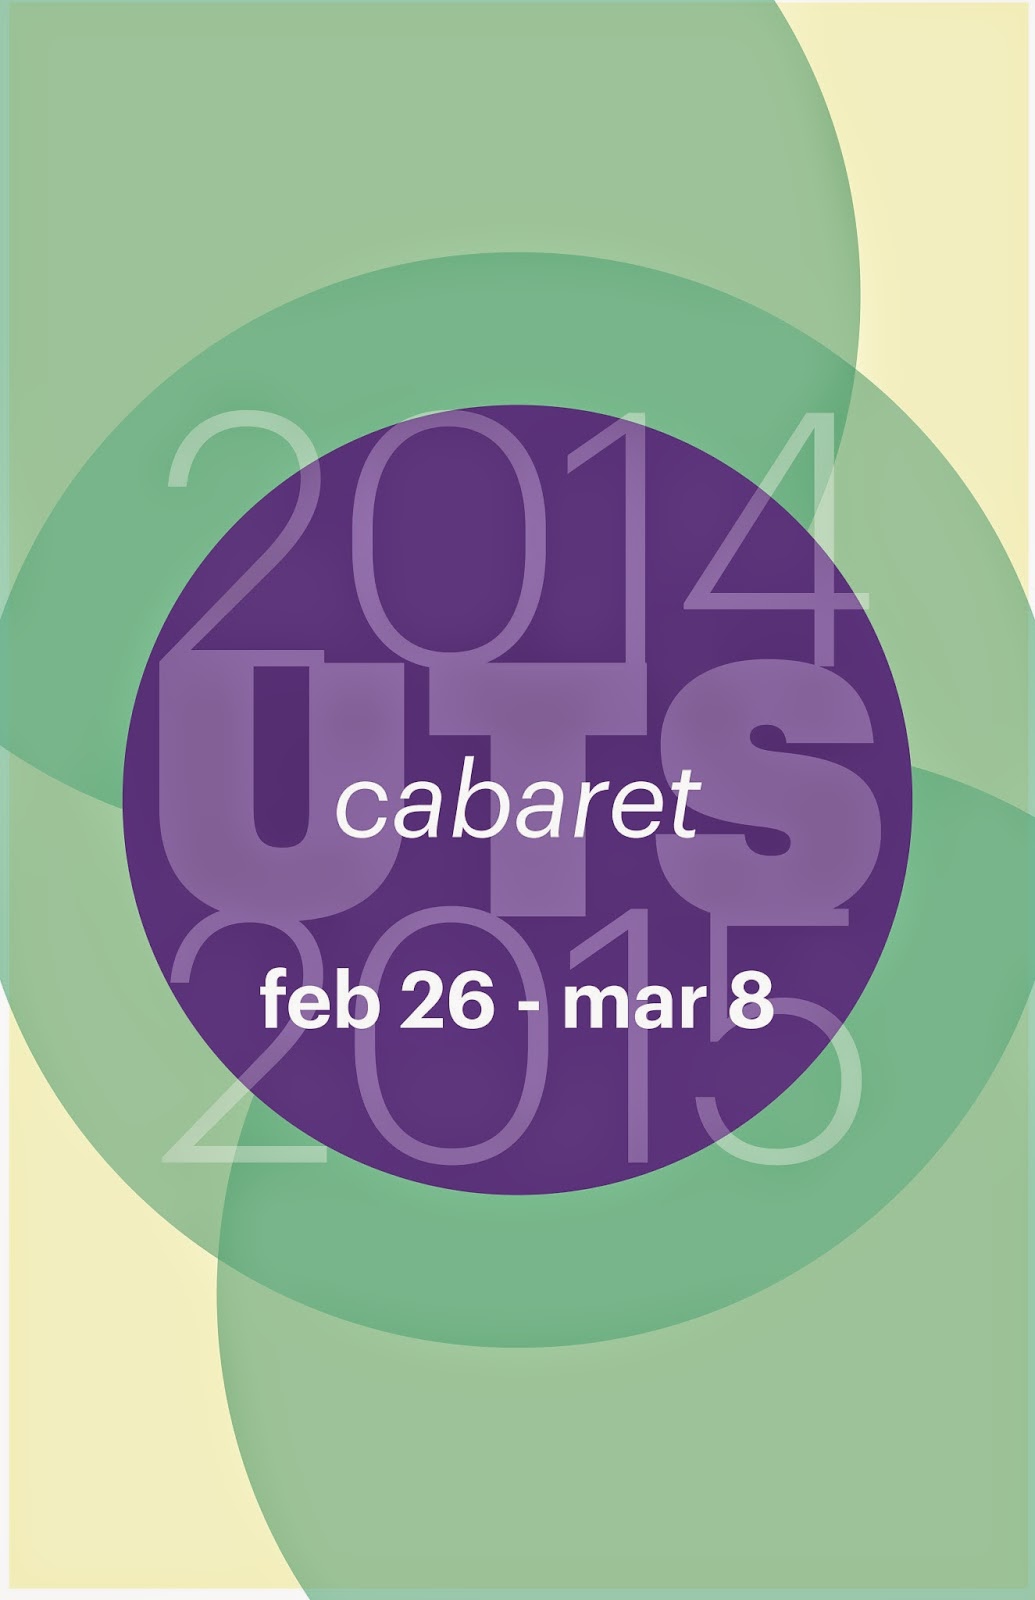 poster for Undergraduate Theater Society 2014-2015 season with word "Cabaret"